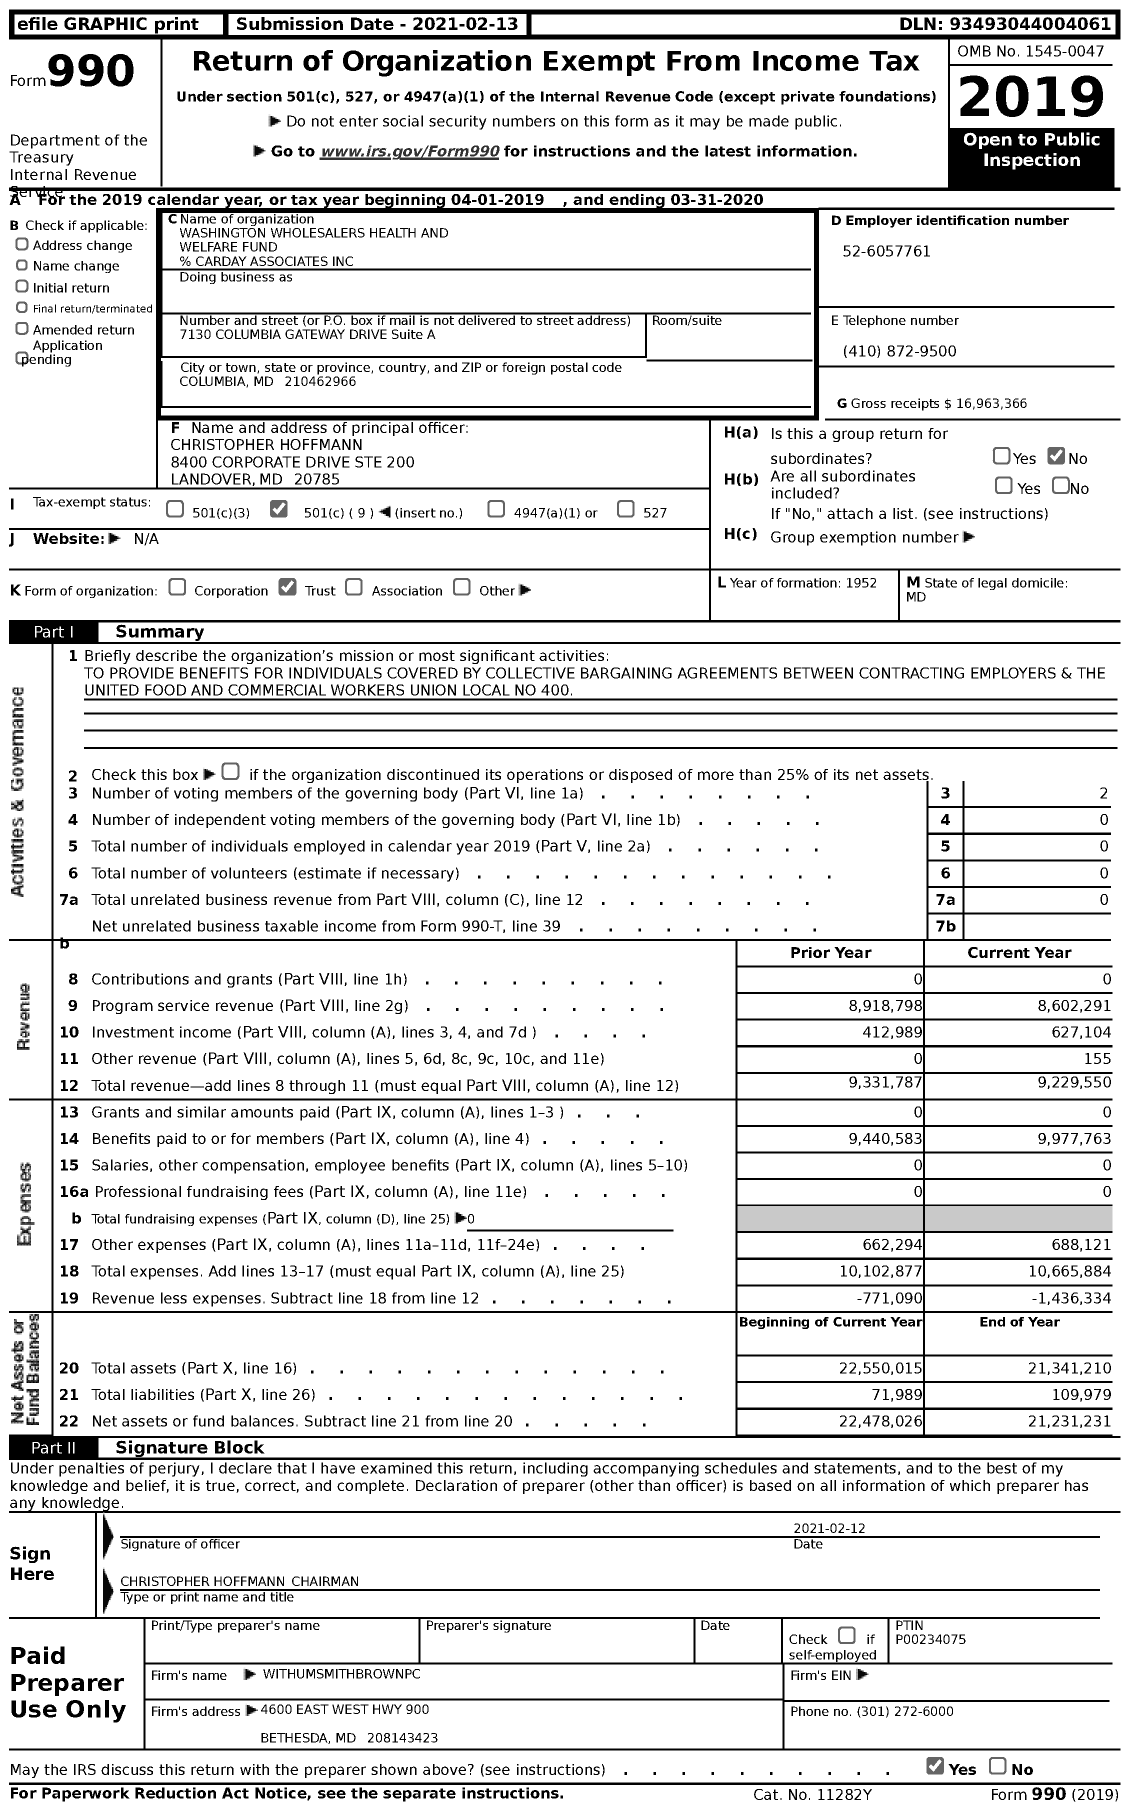 Image of first page of 2019 Form 990 for Washington Wholesalers Health and Welfare Fund